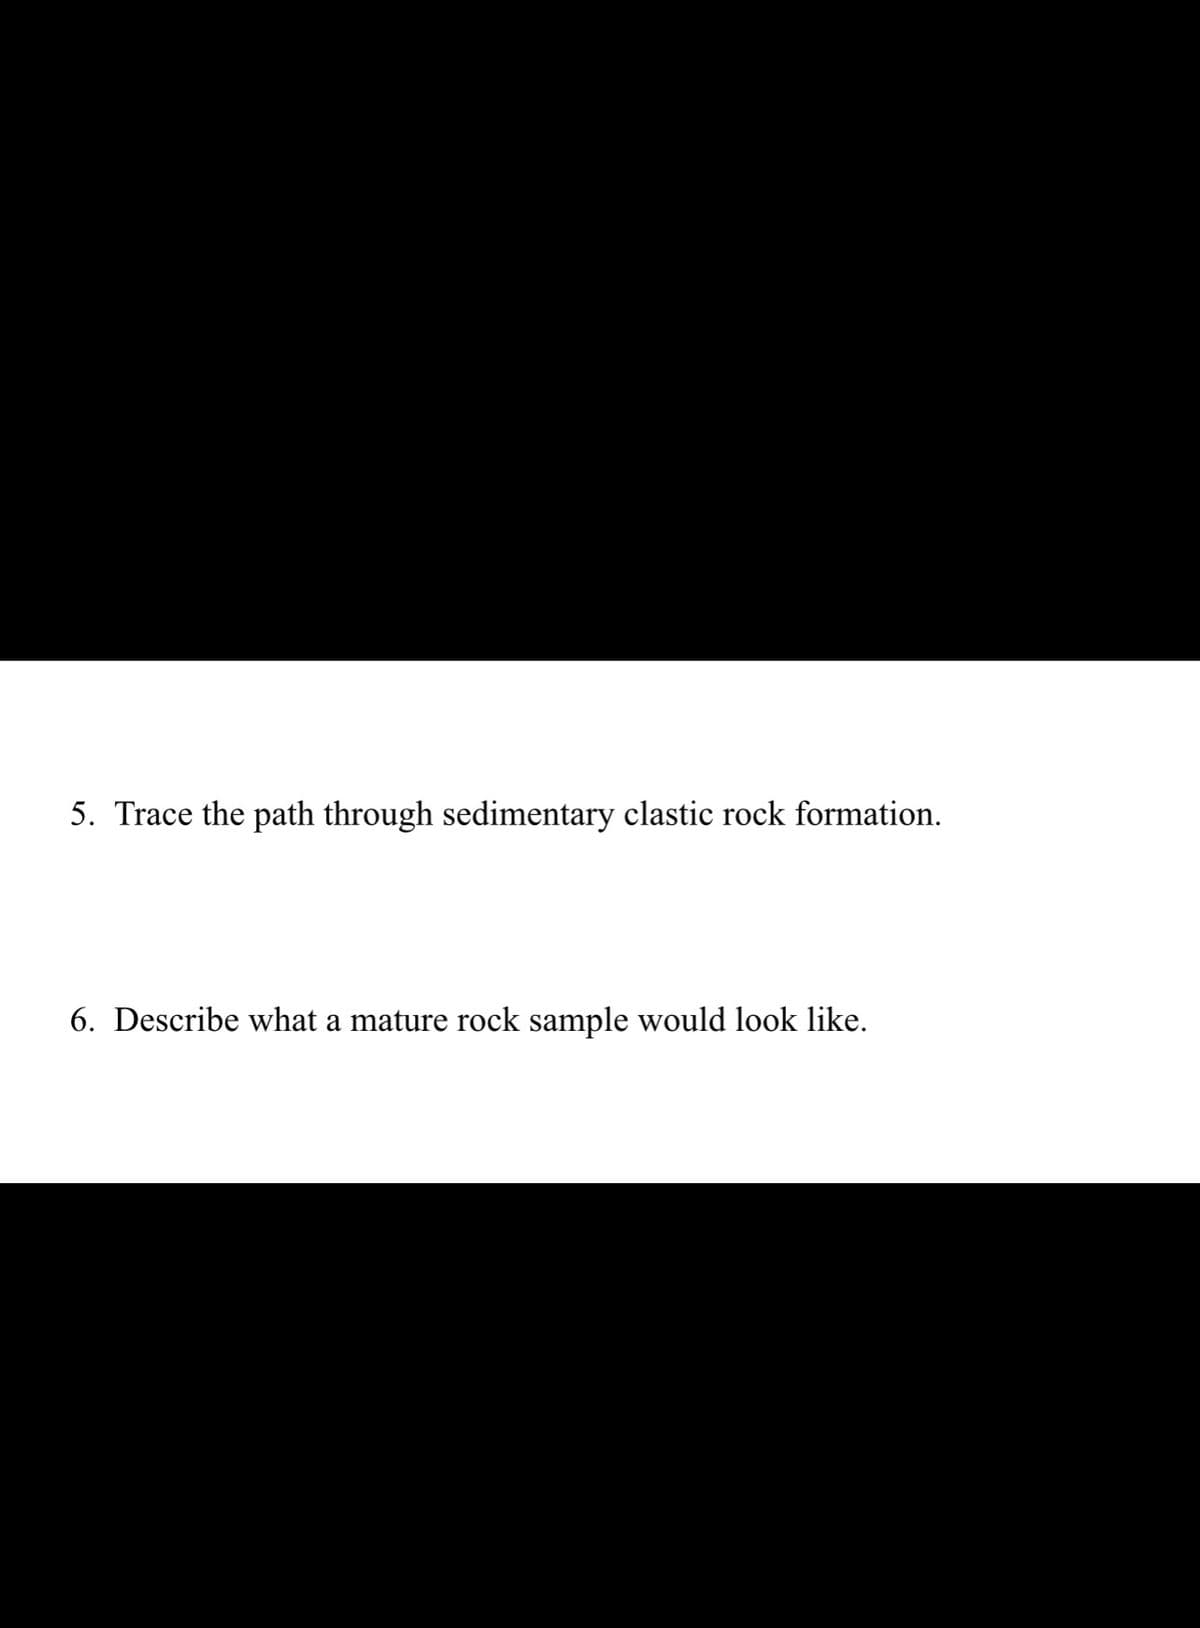 5. Trace the path through sedimentary clastic rock formation.
6. Describe what a mature rock sample would look like.